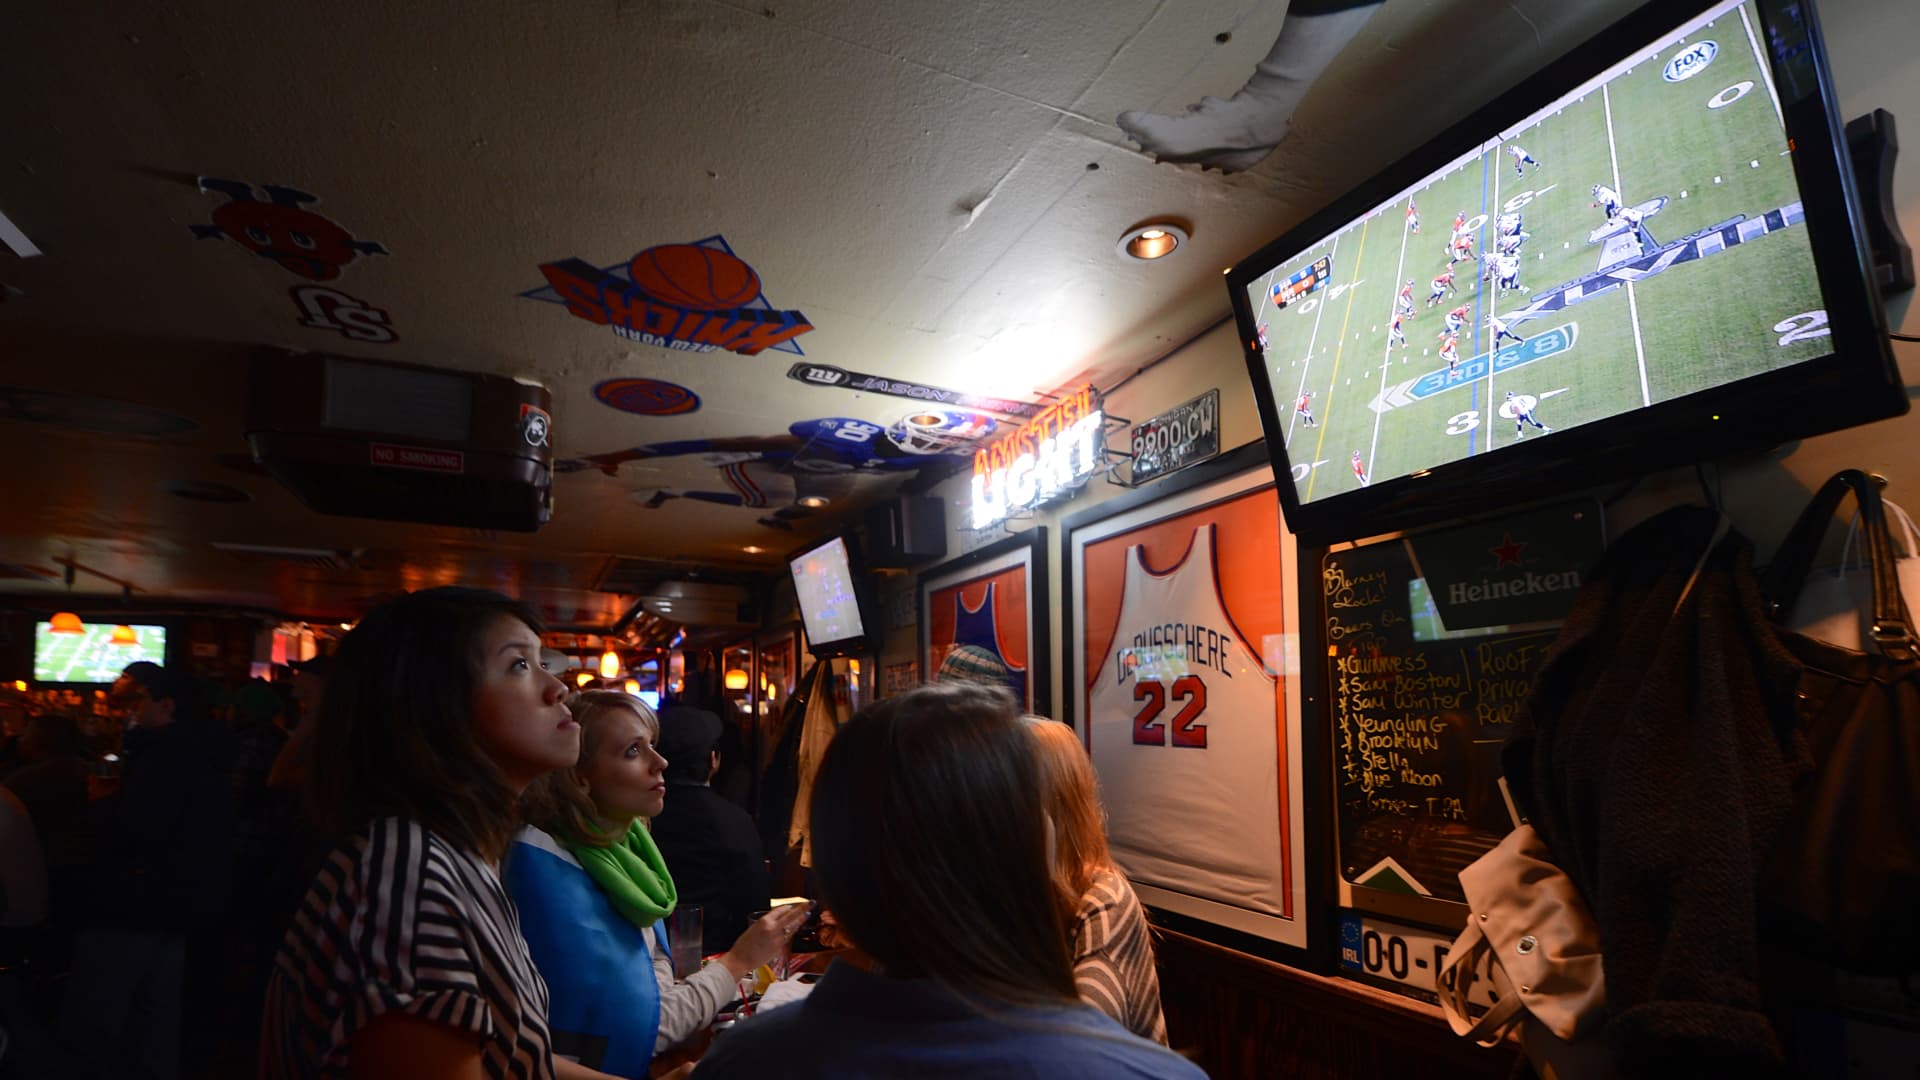 DirecTV reaches deal to provide NFL 'Sunday Ticket' to bars and restaurants